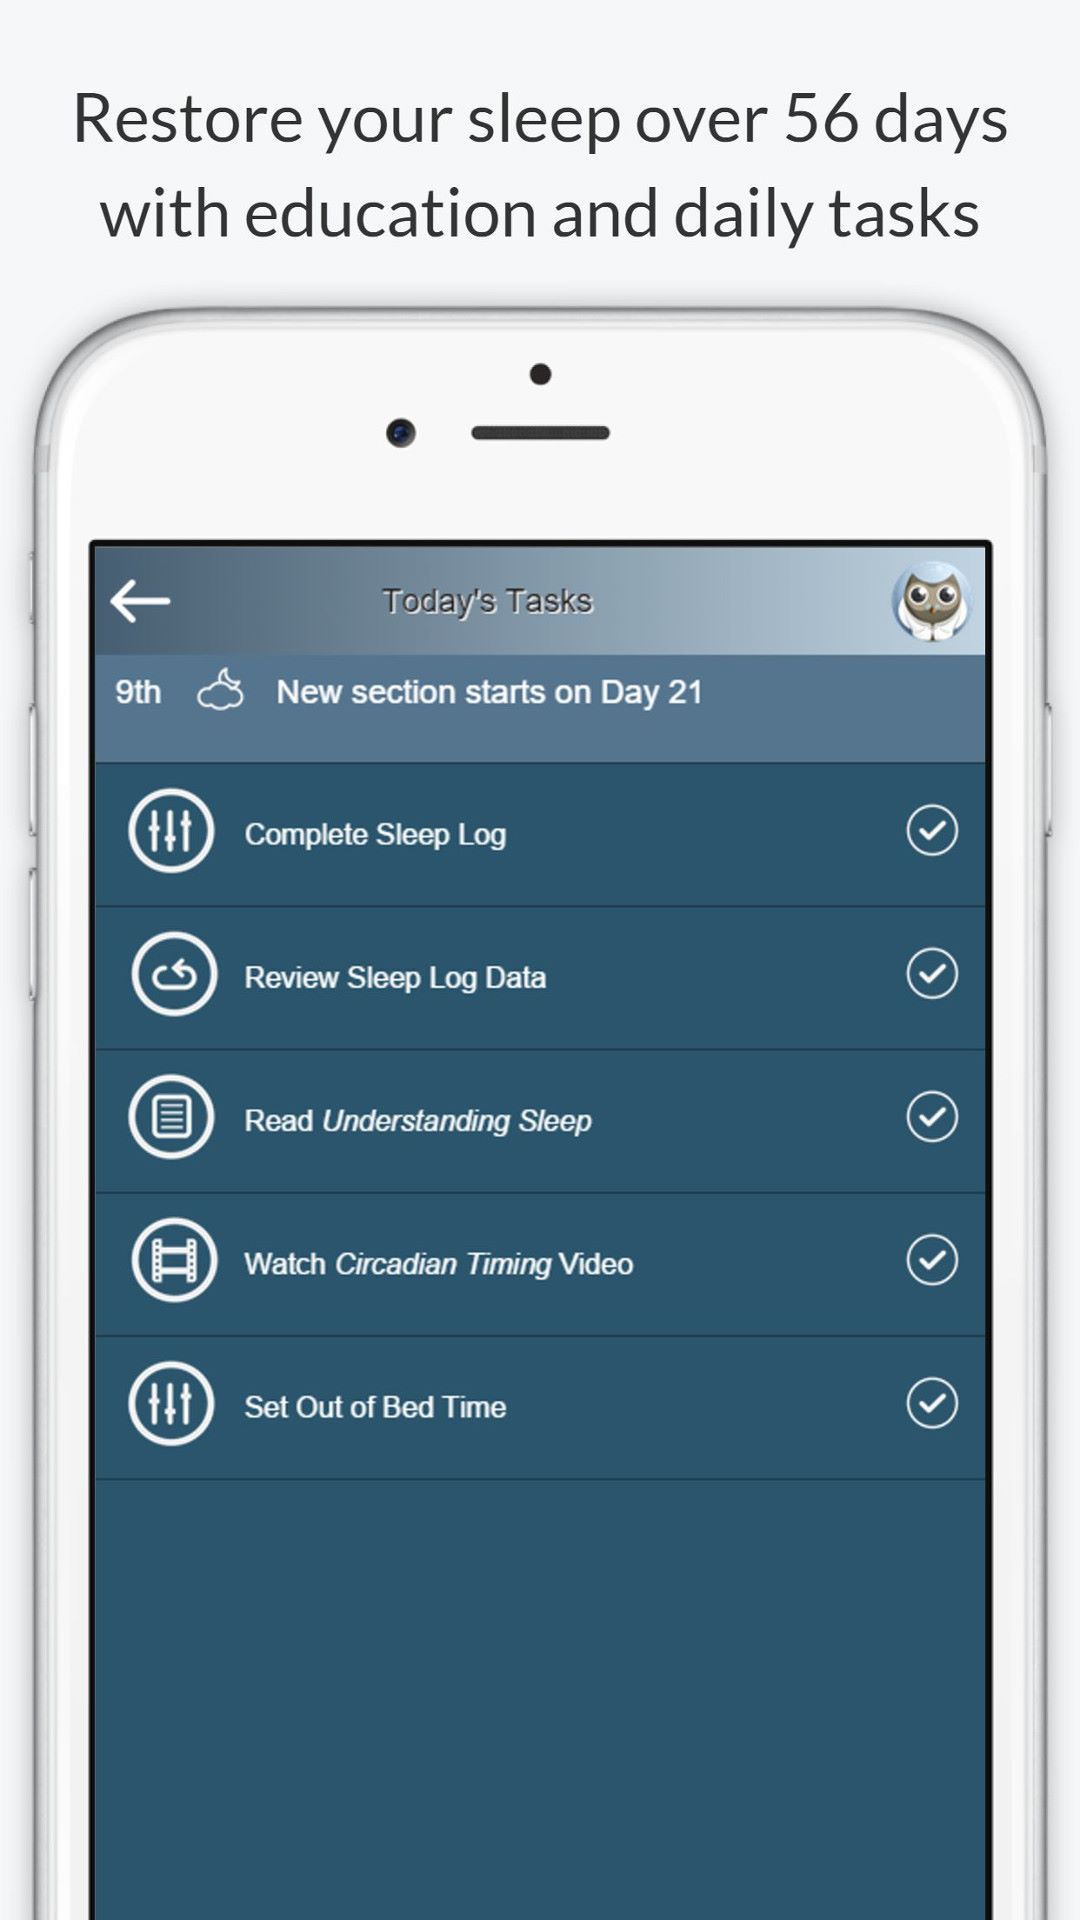 Night Owl - Sleep Coach - Cognitive Behavioral Therapy for Insomnia